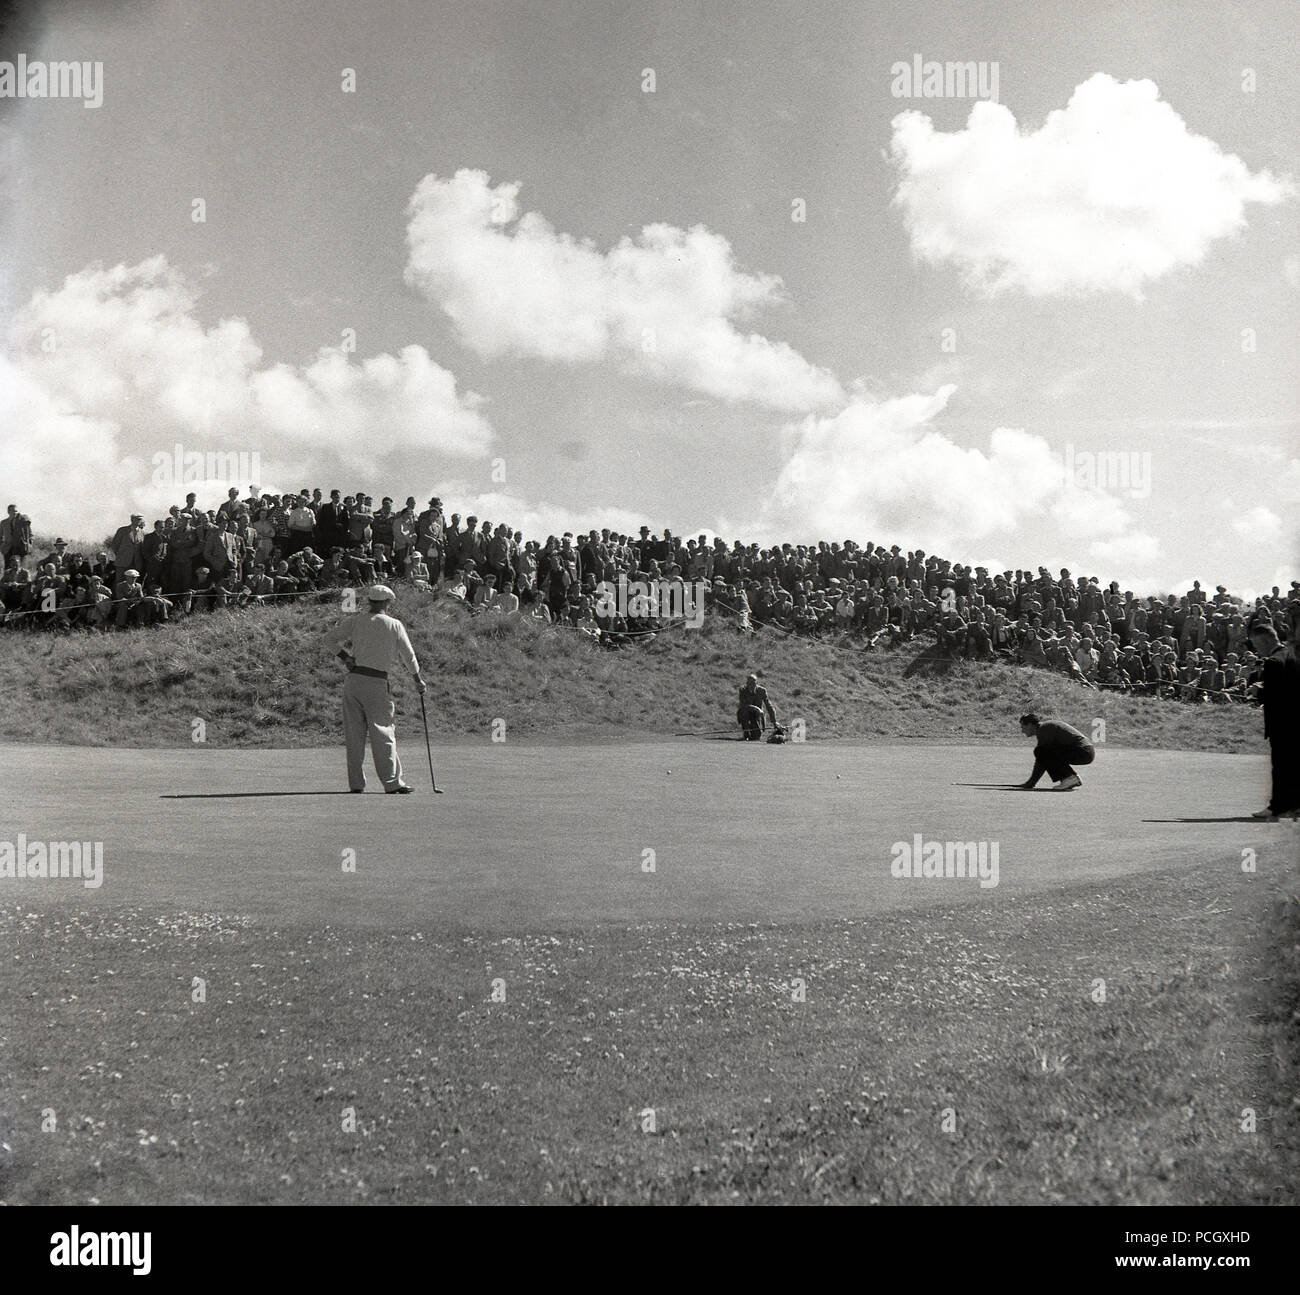 1951, players on a green watched by specators on a sandhill at The Open Championship on the links golf course of Royal Portrush, Co Antrim, Northern Ireland. The event, won by Englishman Max Faulkner who won £300, was often referred to in this era as the 'British Open'. Stock Photo